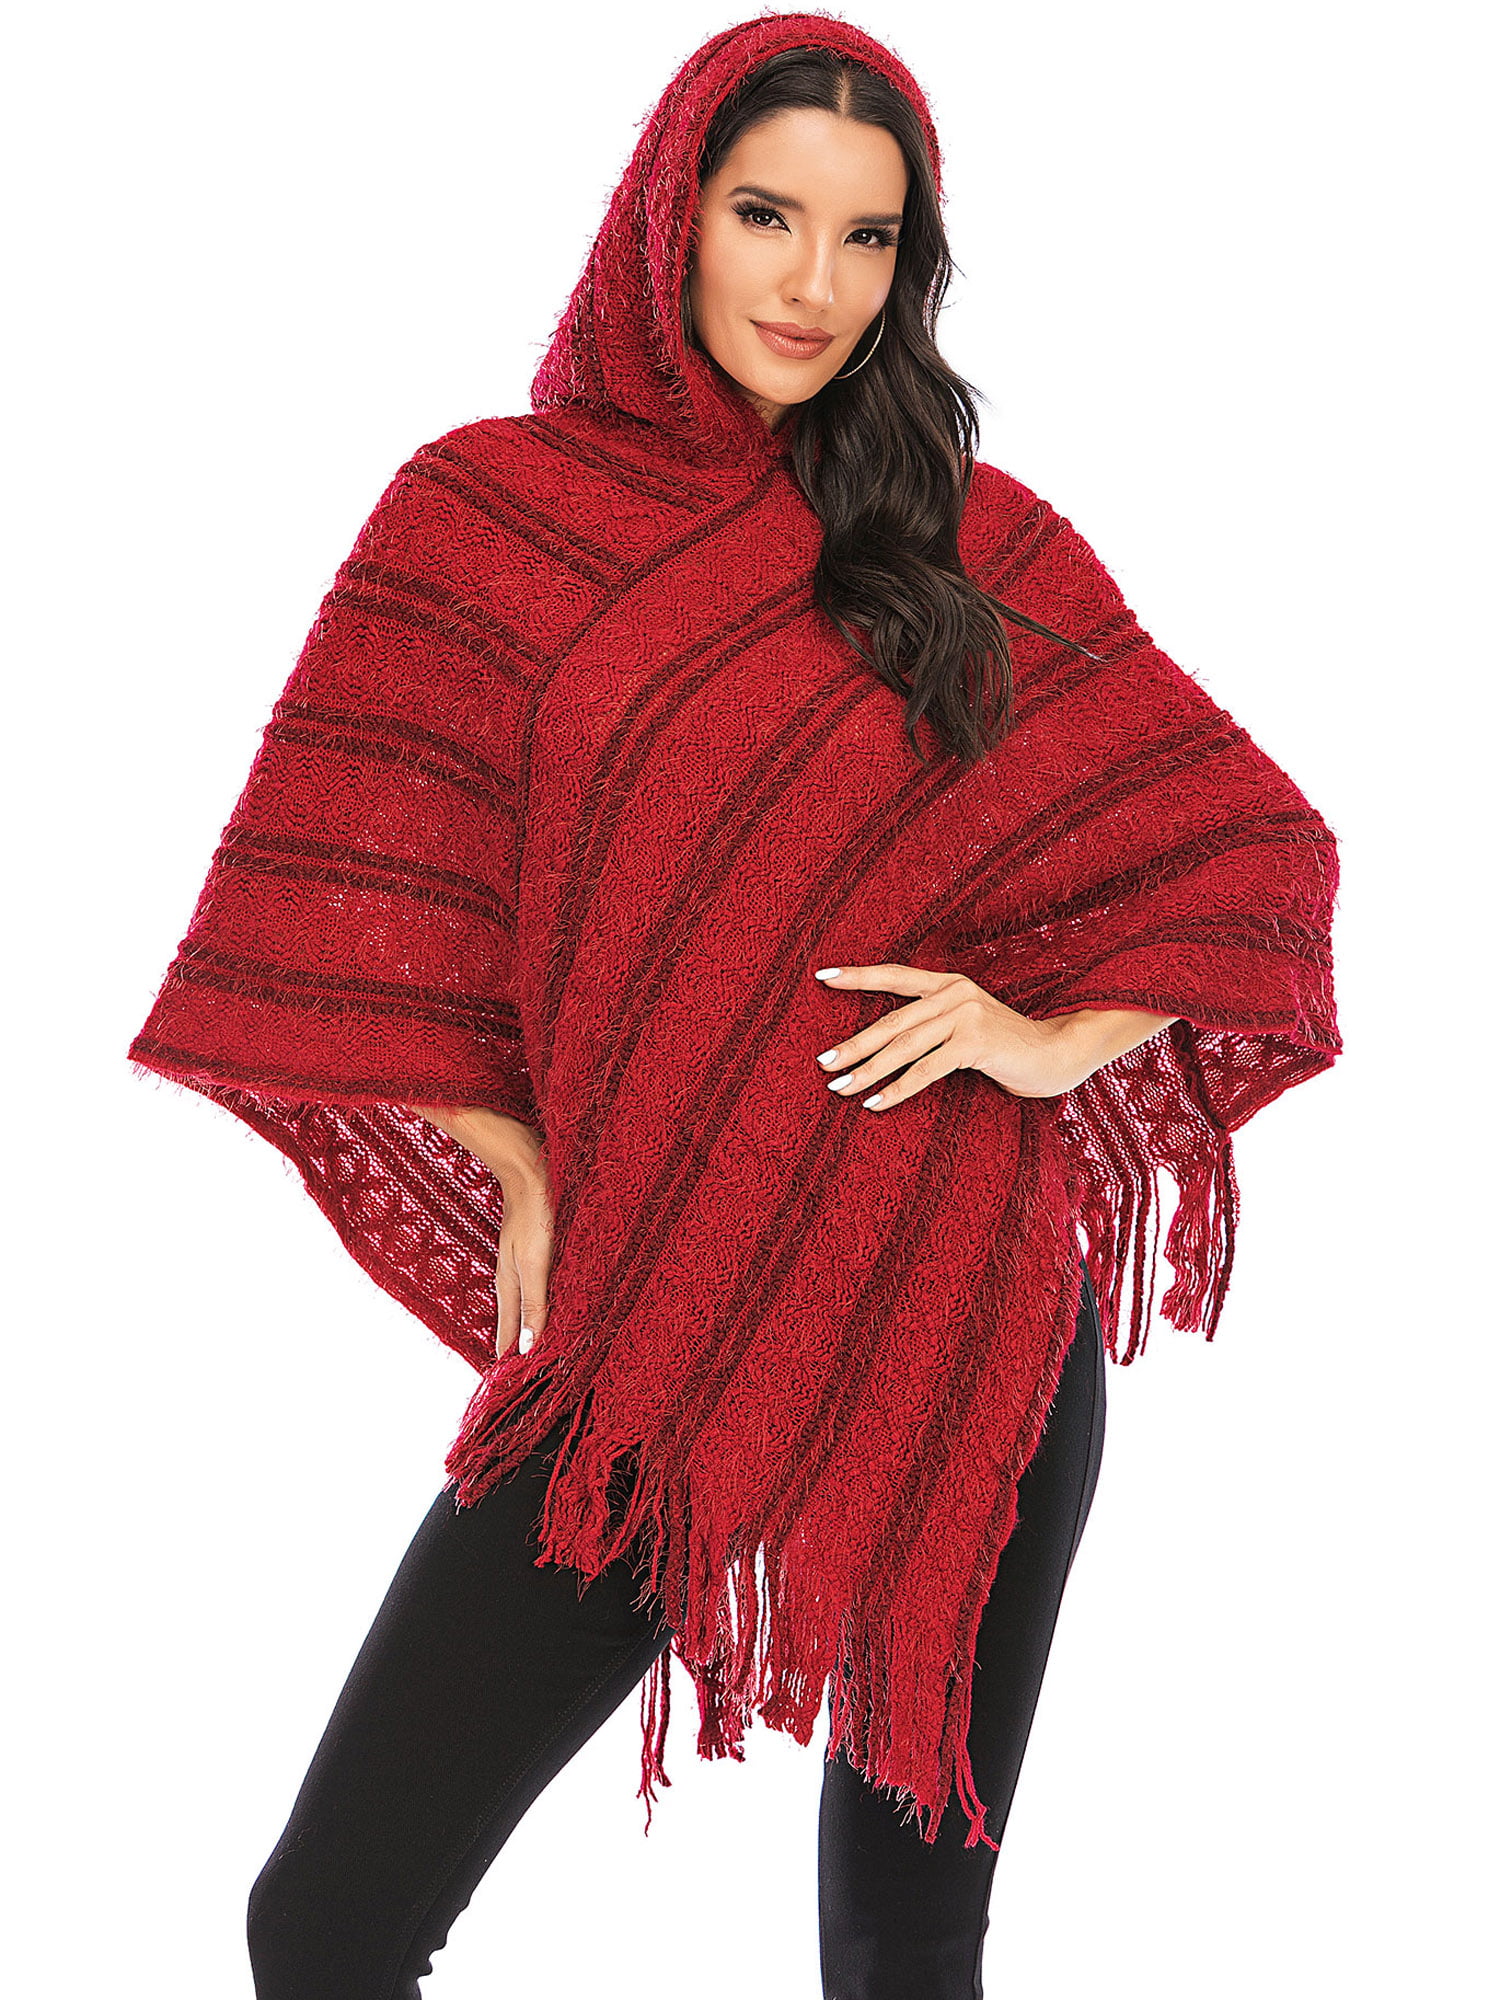 Women Diamond Check Knitted Cape Poncho Shawl Caped Ladies Scarf Winter Cardigan 